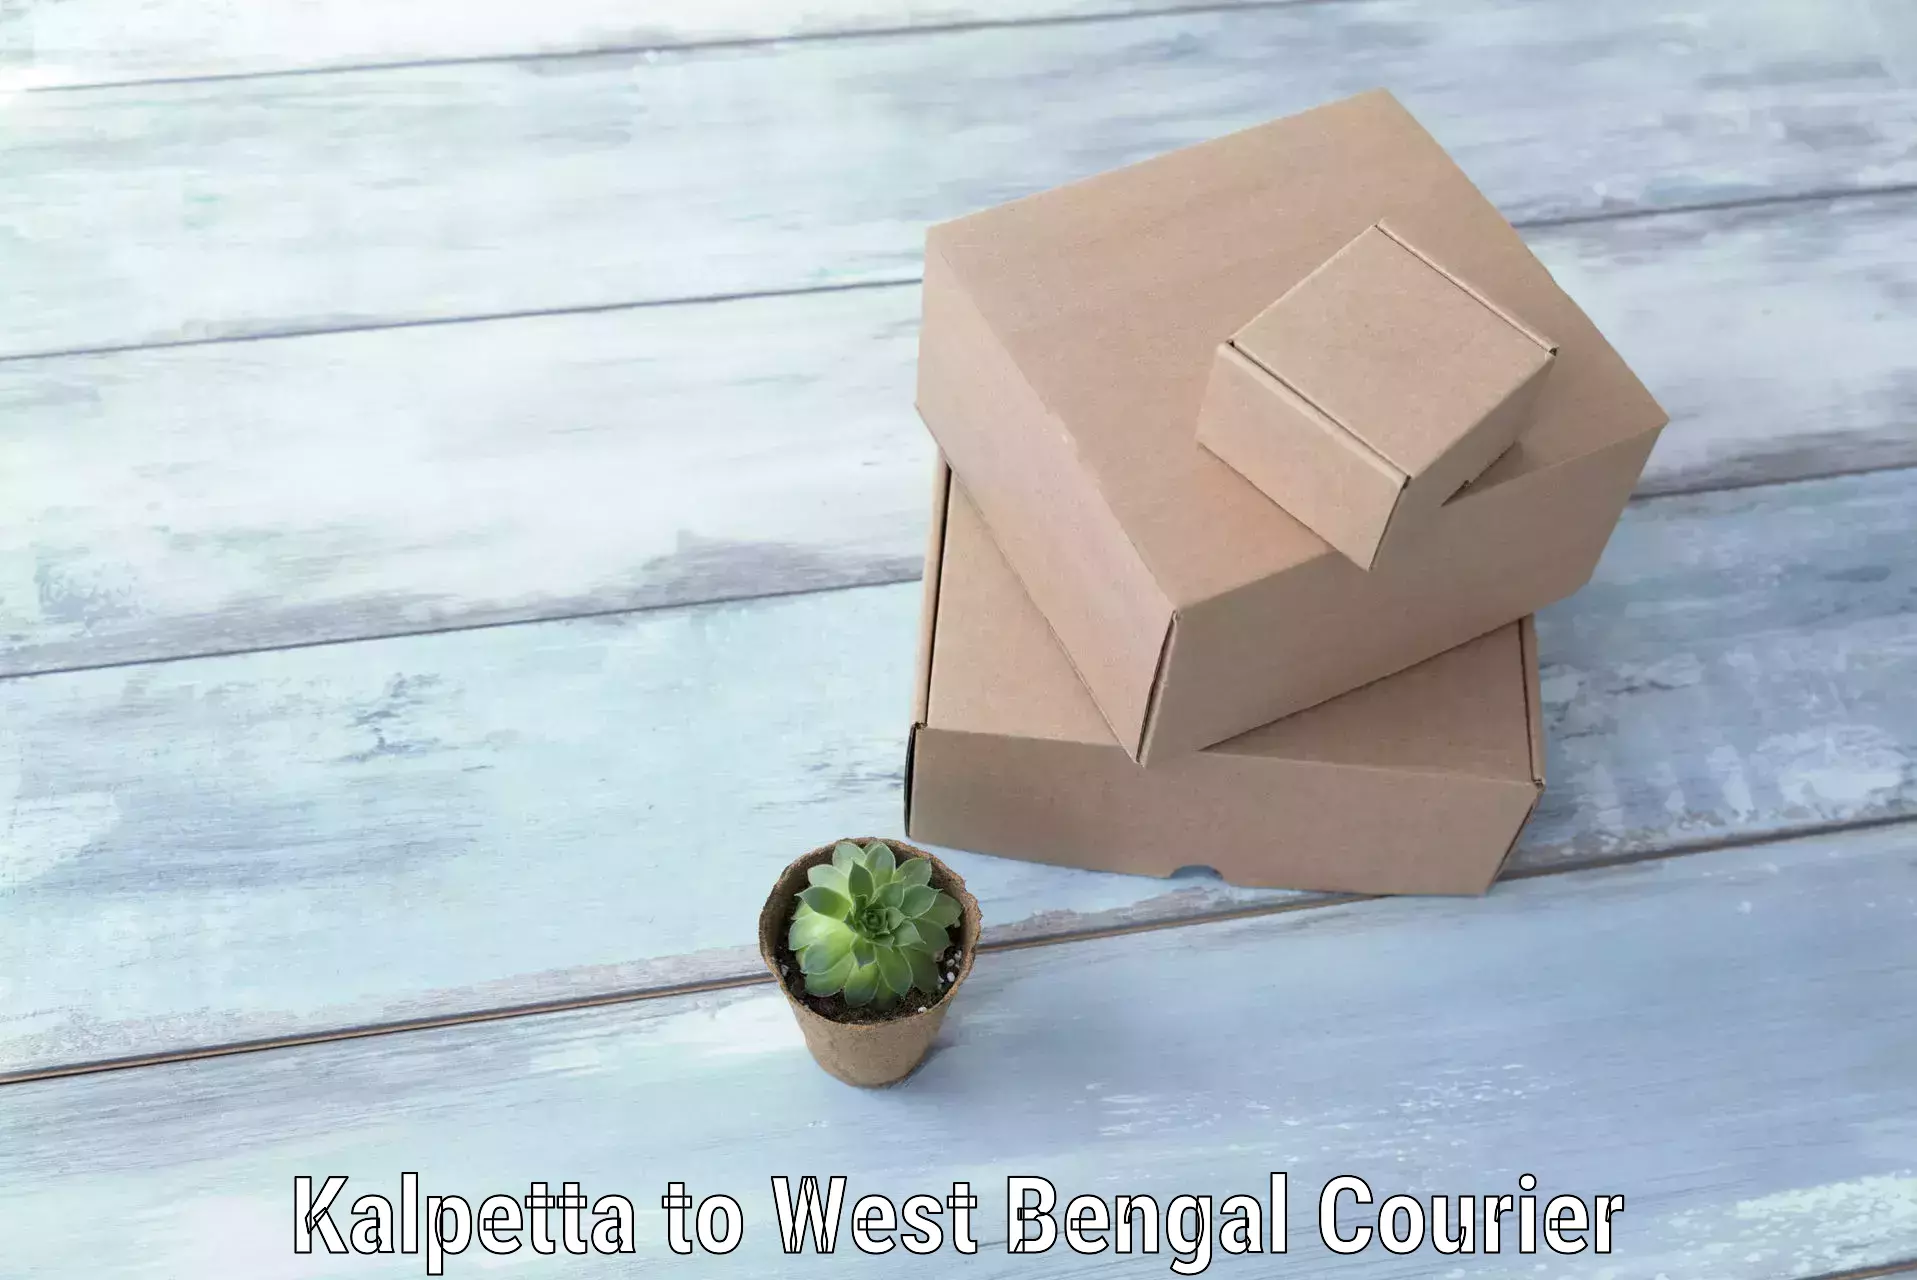 Luggage shipment specialists Kalpetta to West Bengal